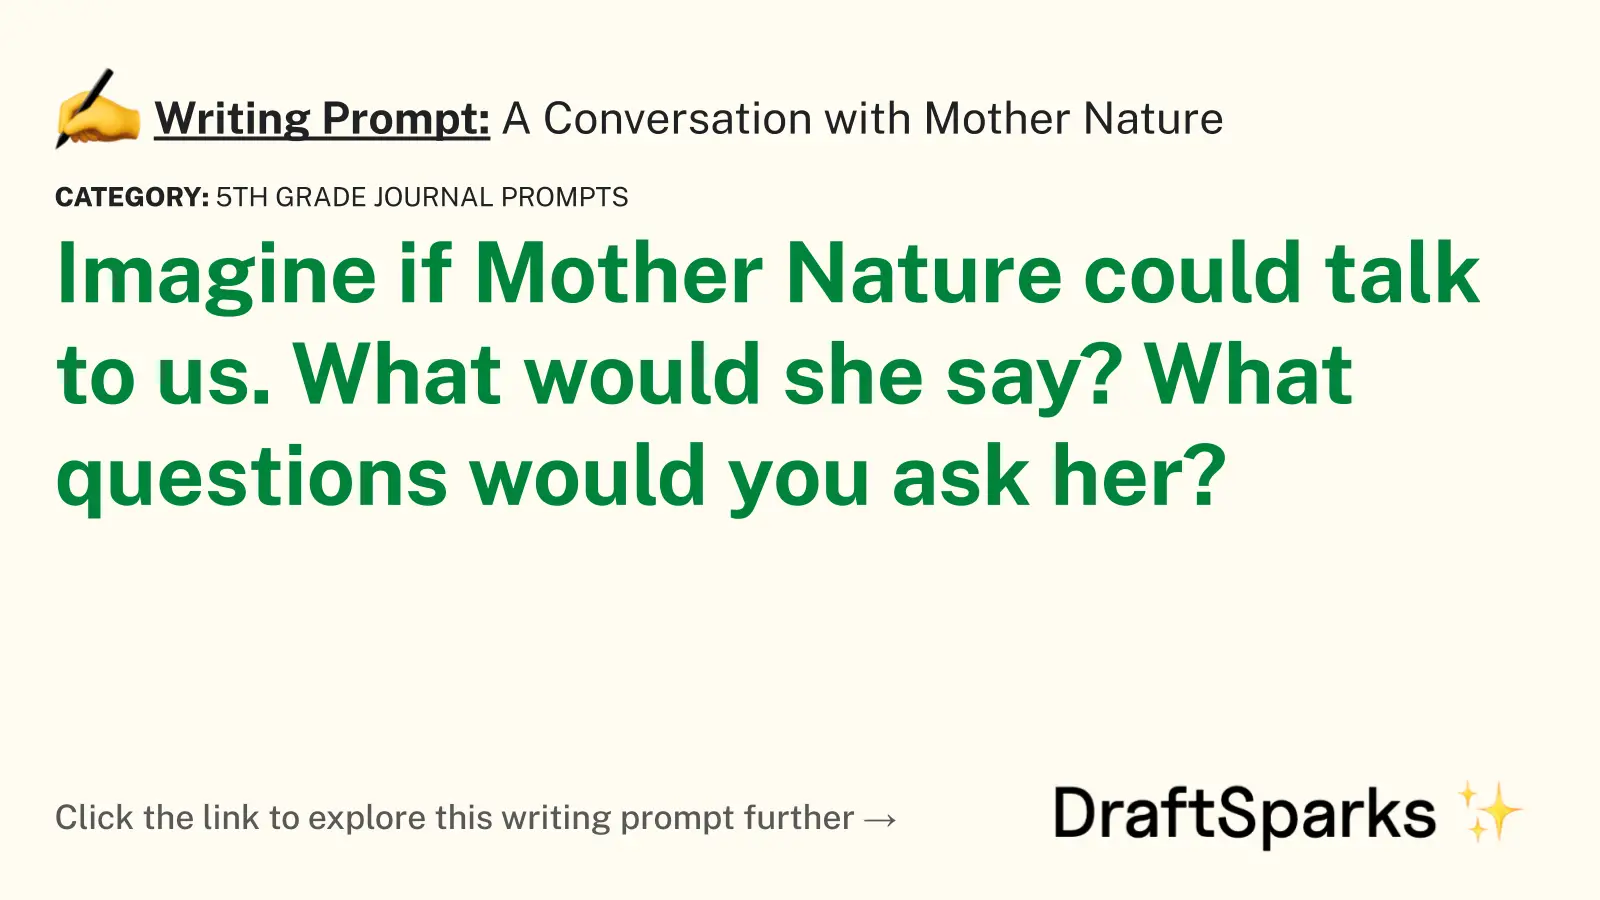 A Conversation with Mother Nature